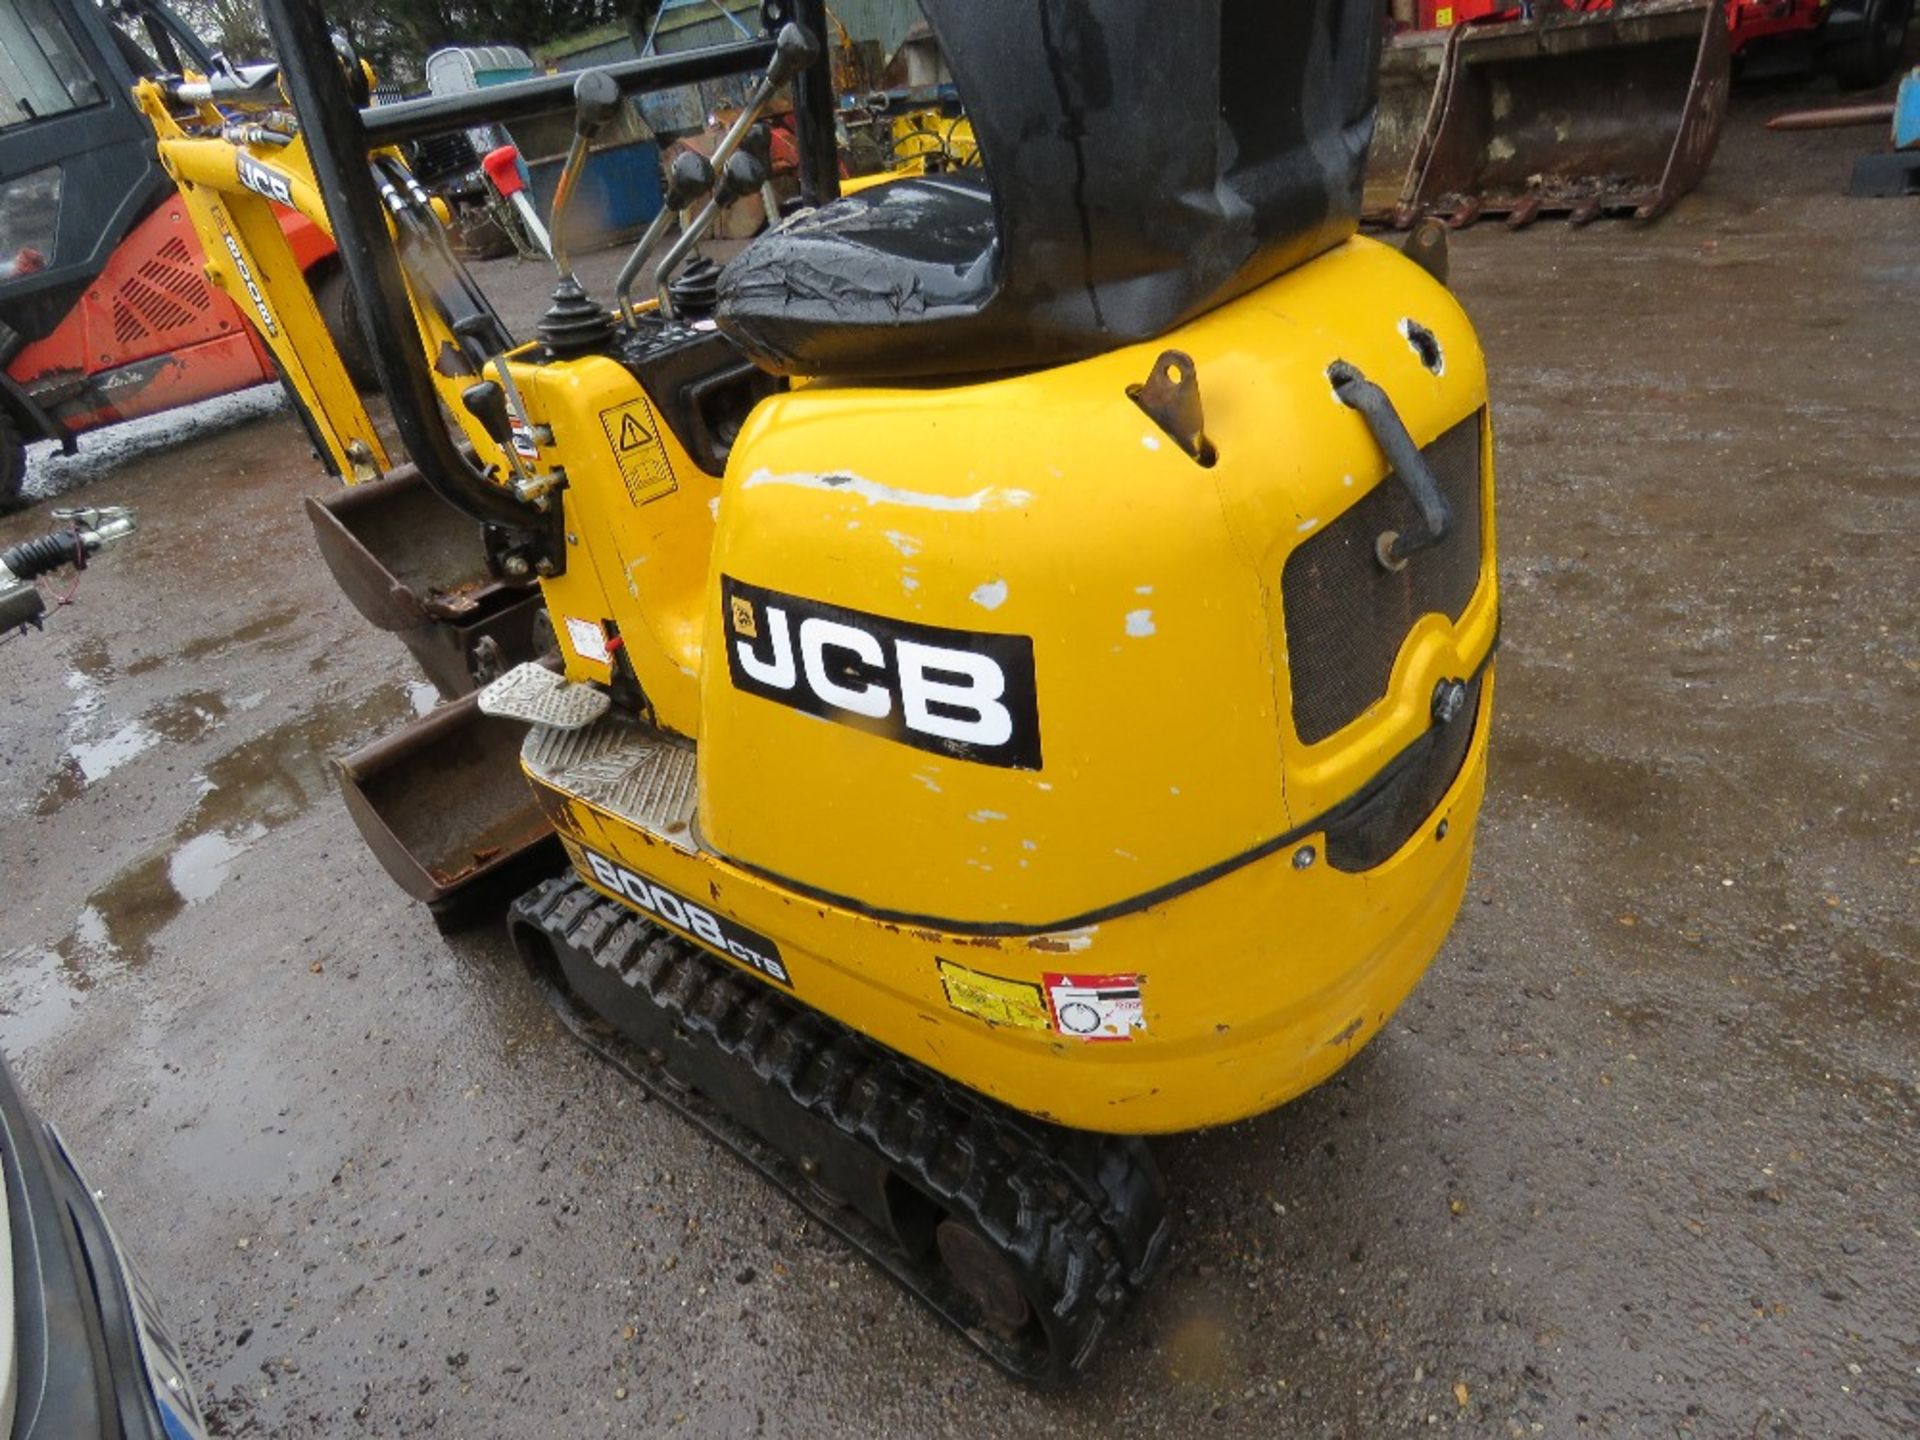 JCB 8008CTS MICRO EXCAVATOR YEAR 2019. 463 REC HOURS. 3 NO BUCKETS. needs some attention - Image 5 of 10